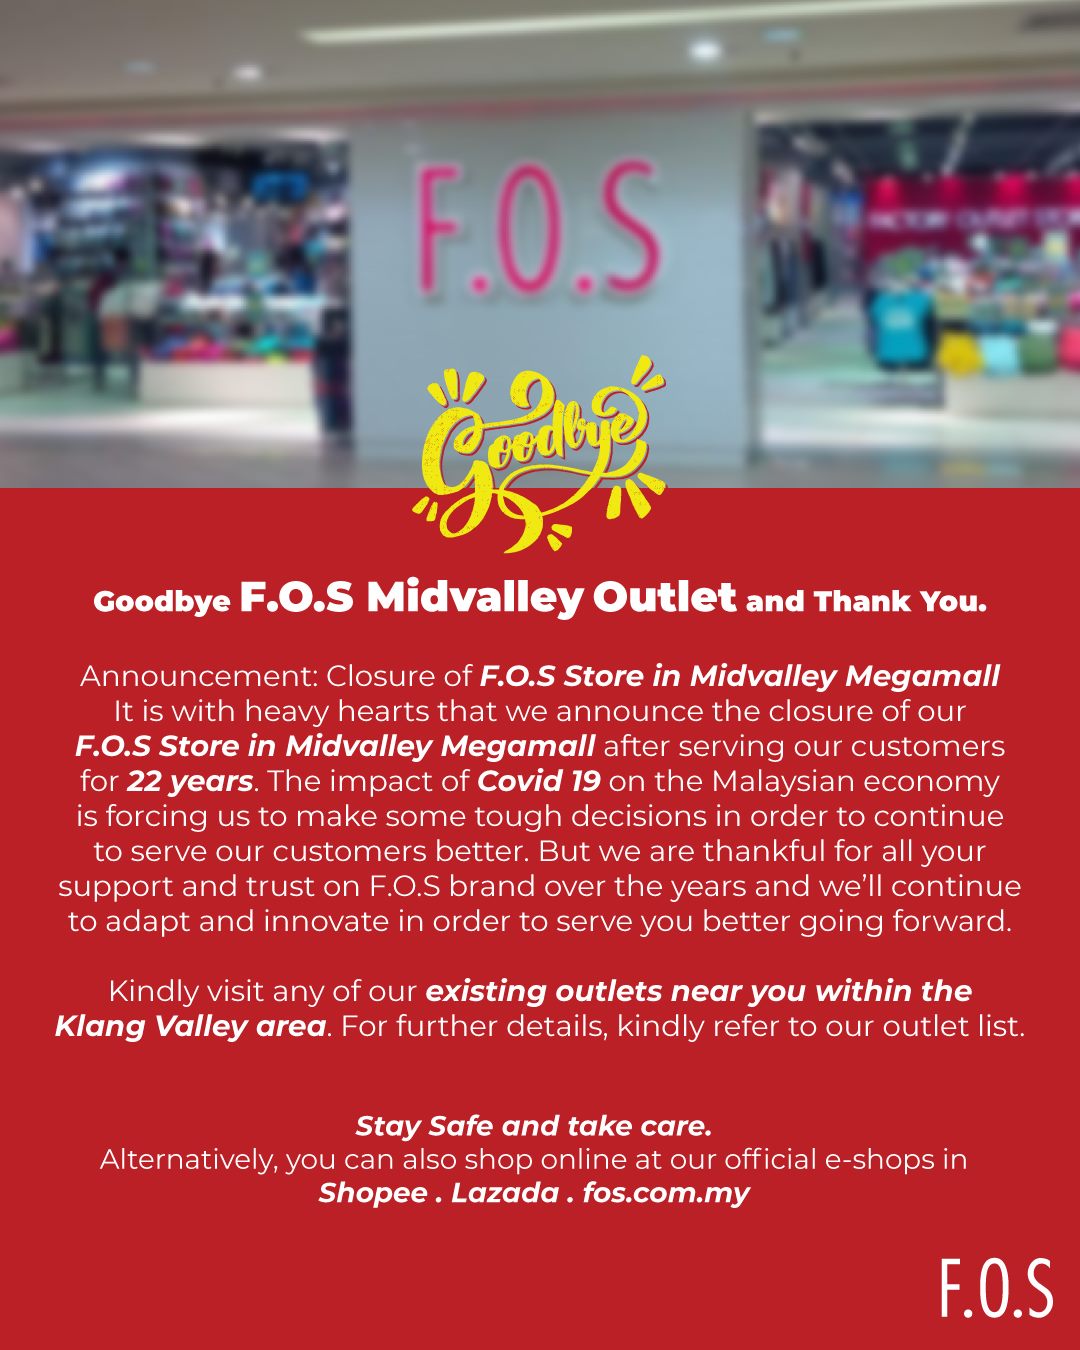 F.O.S Mid Valley outlet closure announcement